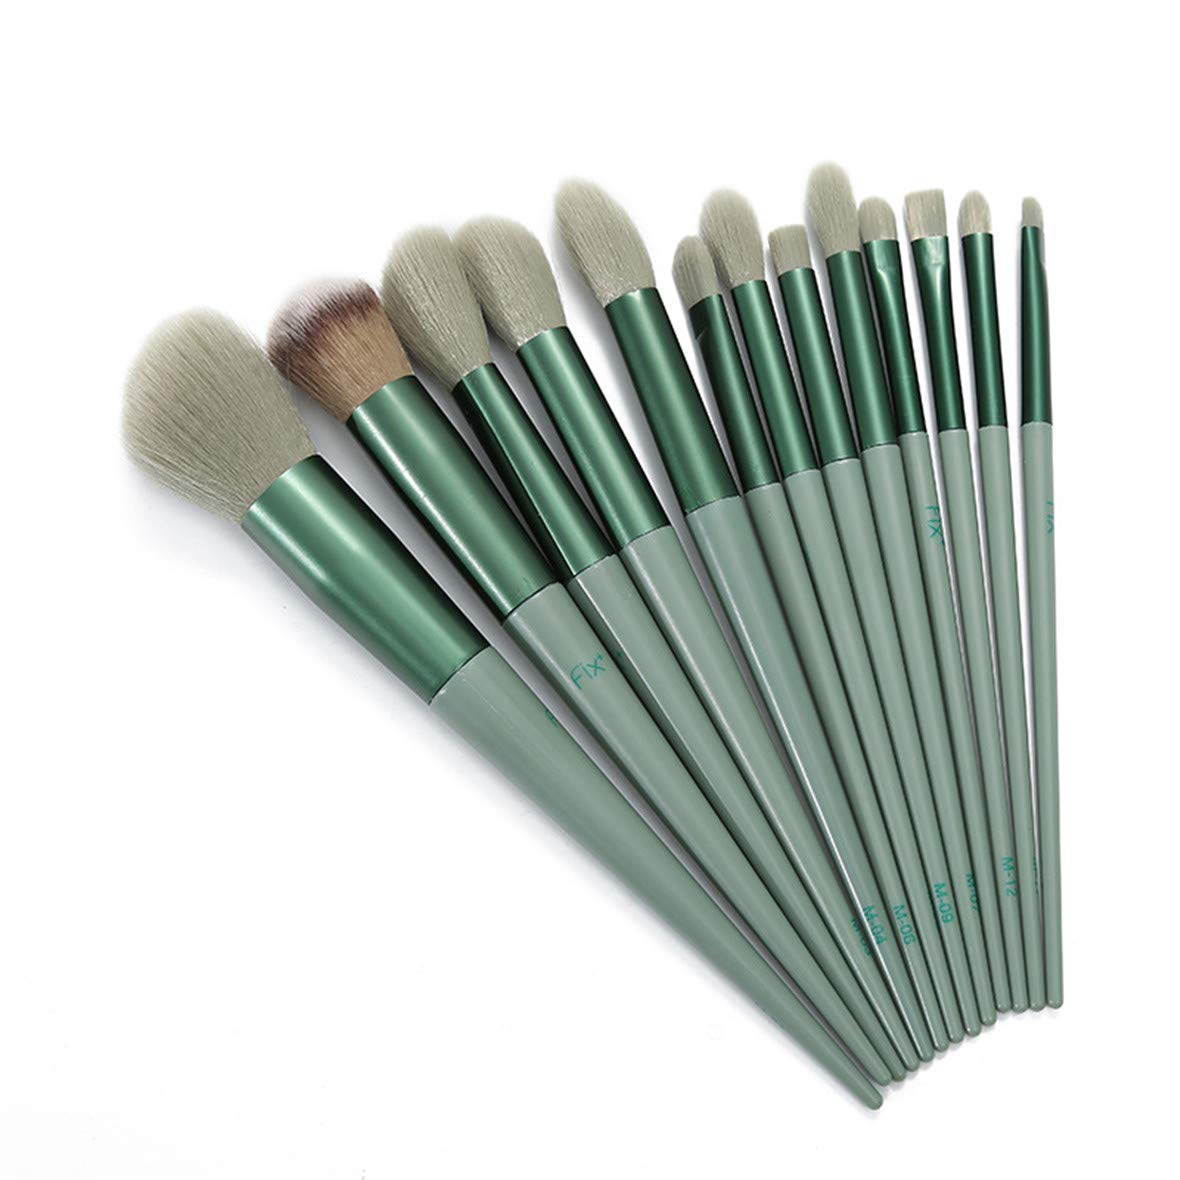 13 Pcs Makeup Brushes Sets Synthetic Foundation Blending Concealer Eye Shadow | Auzzi Store